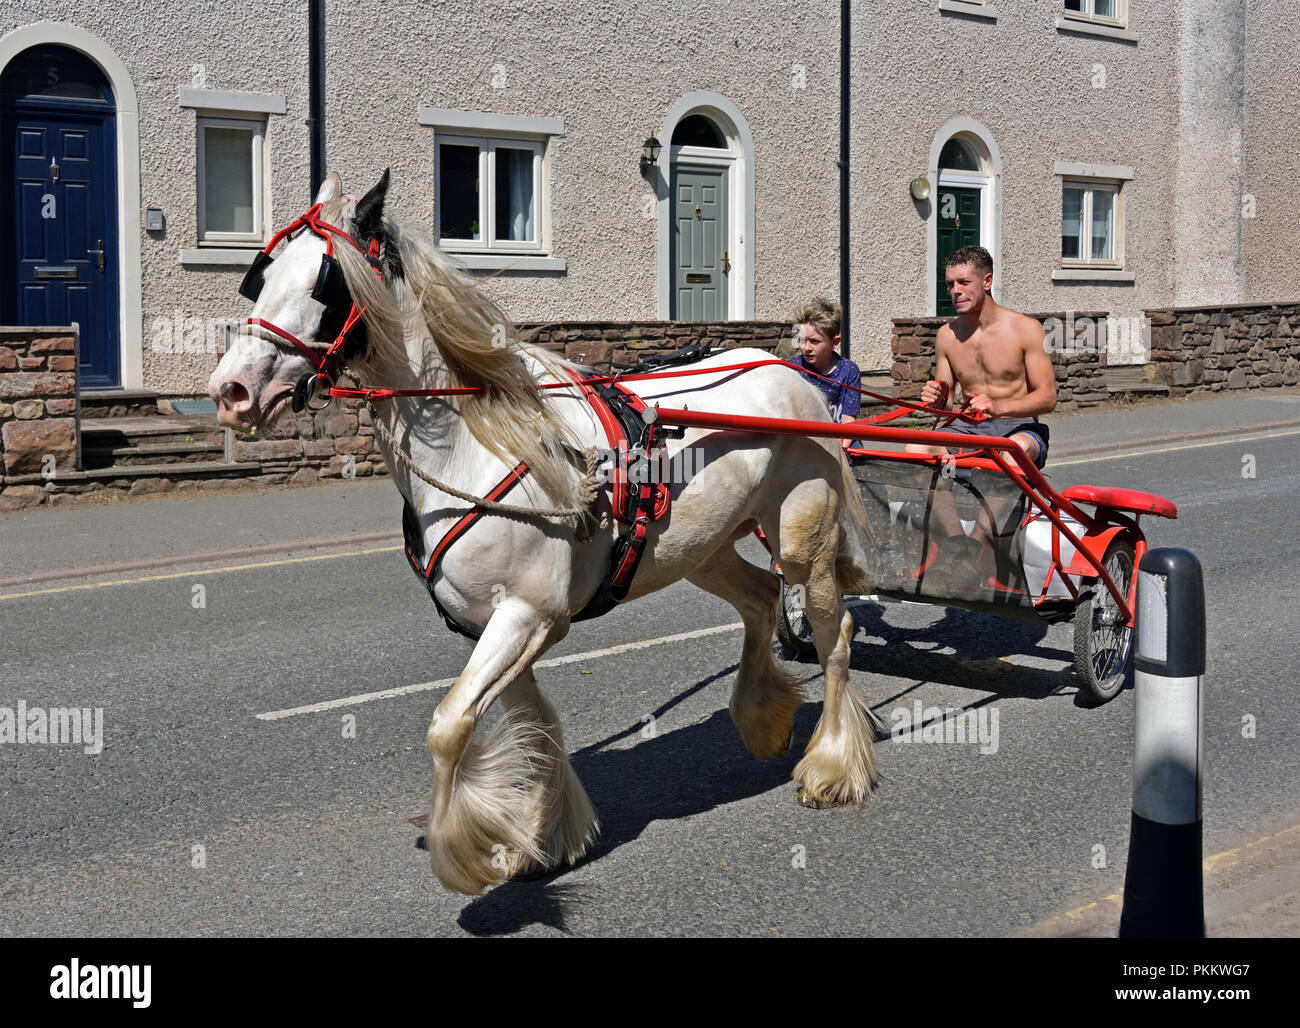 Two Gypsy Travellers riding on cart. Appleby Horse Fair 2018. The Sands, Appleby-in-Westmorland, Cumbria, England, United Kingdom, Europe.cart Stock Photo